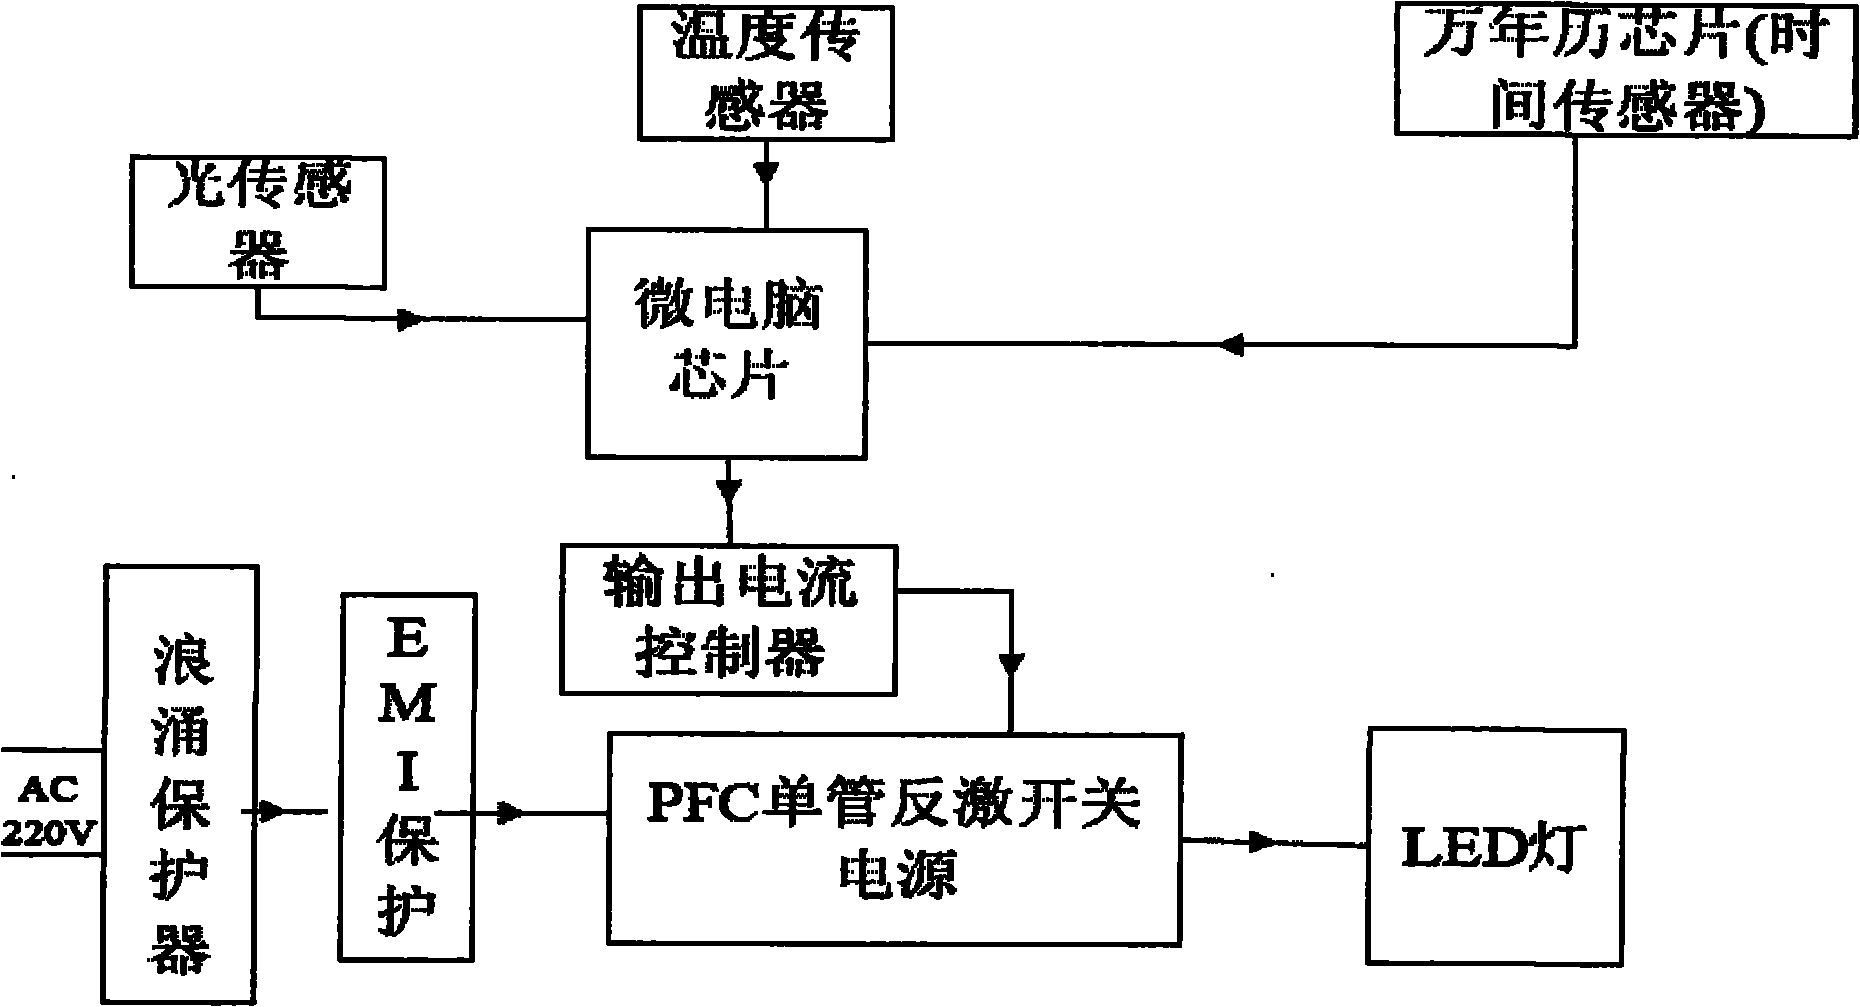 LED (light emitting diode) street lamp driving circuit capable of regulating output illuminance automatically